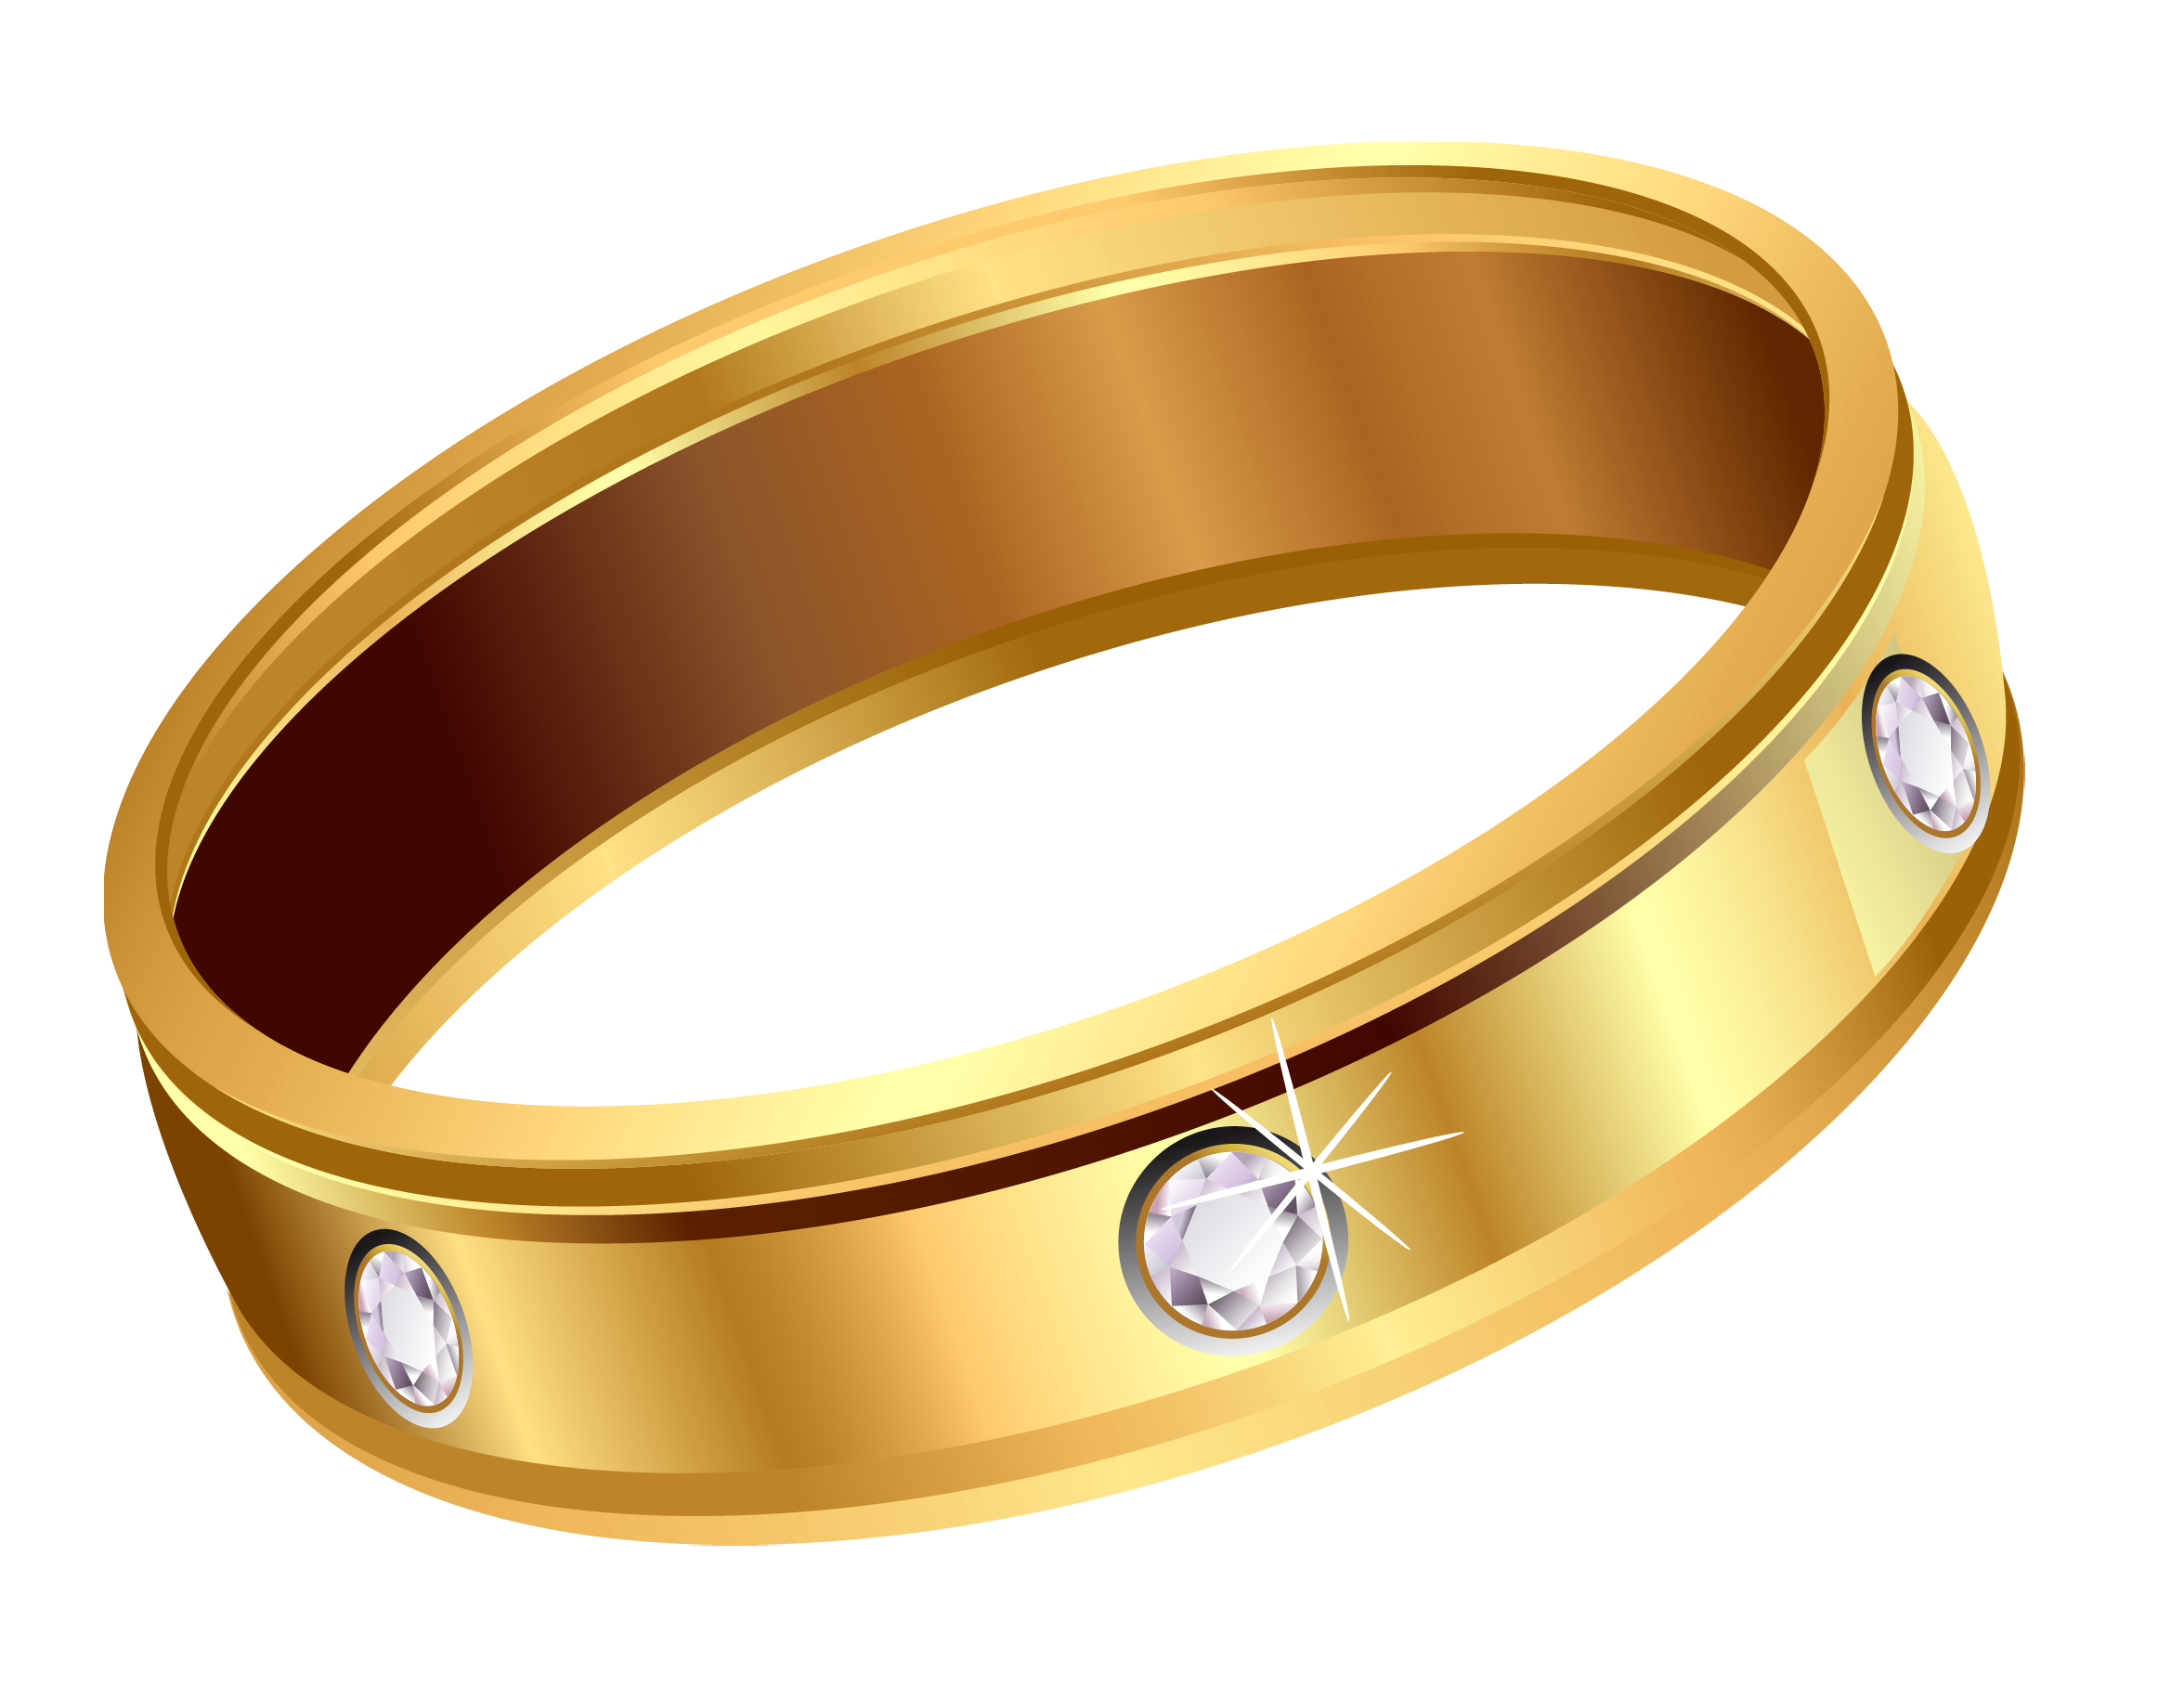 Transparent Gold Ring with Diamonds PNG Clipart